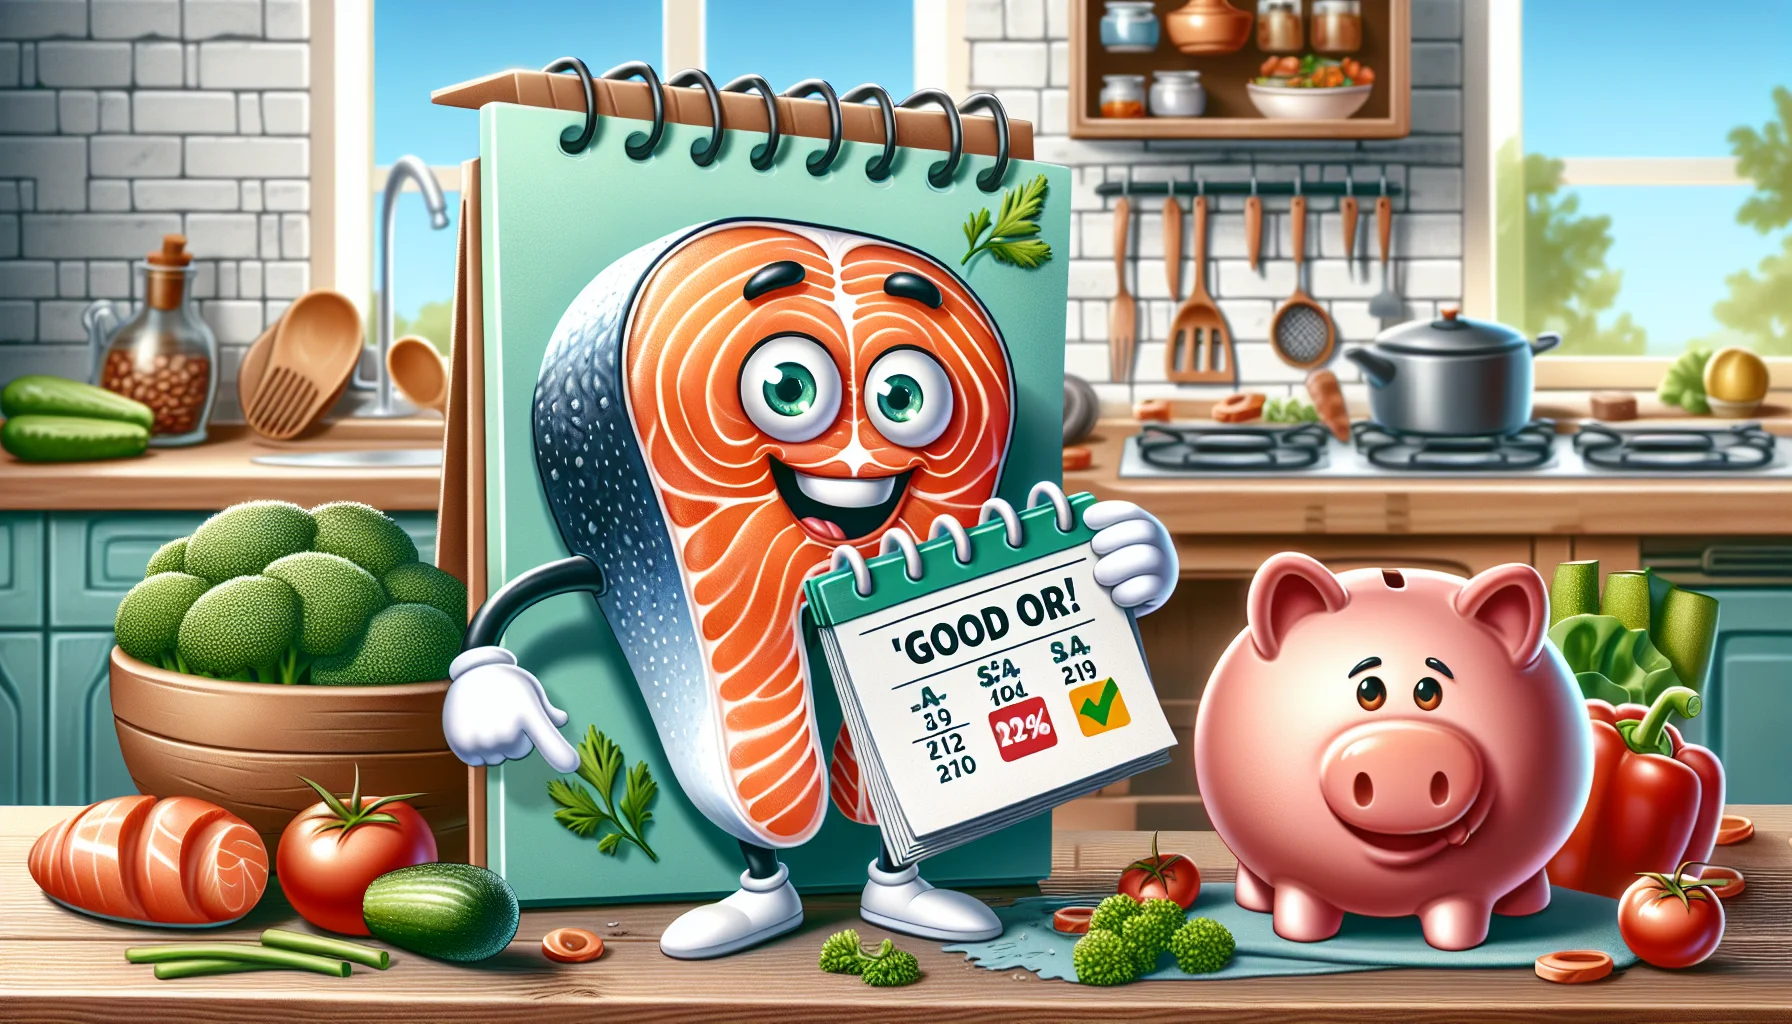 Imagine a hilarious scene where a piece of cooked salmon, cartoon-like and cheerful, is holding a calendar showing that it is 'good for' a specific timeframe. The salmon is standing beside a piggy bank, suggesting cost efficiency. In the background, there's a kitchen full of other fish and vegetables, promoting healthy eating habits. The theme should be realistic but filled with humor to entice people to eat healthily without spending too much.